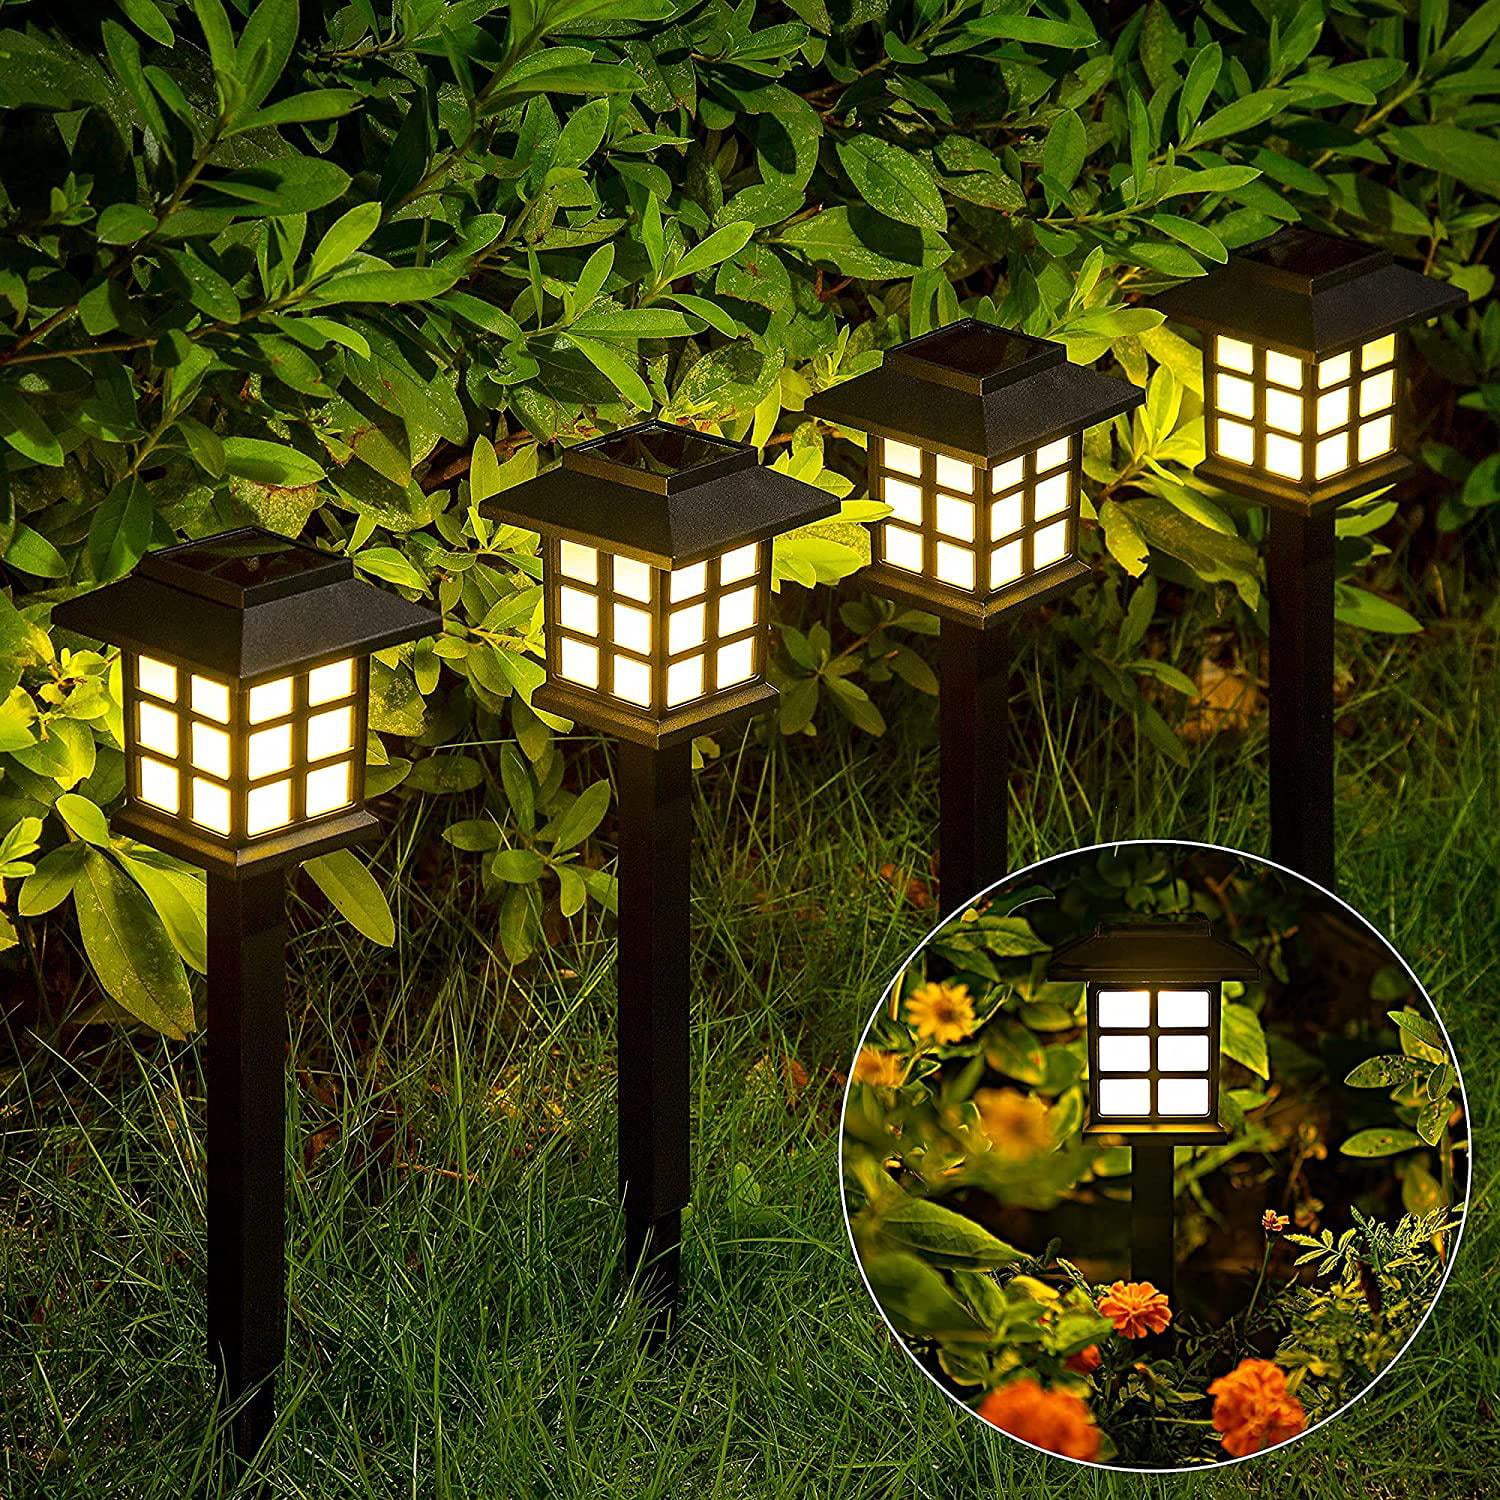 Details about   8LED Solar Power Ground Lights Floor Decking Patio Outdoor Garden Lawn Path Lamp 